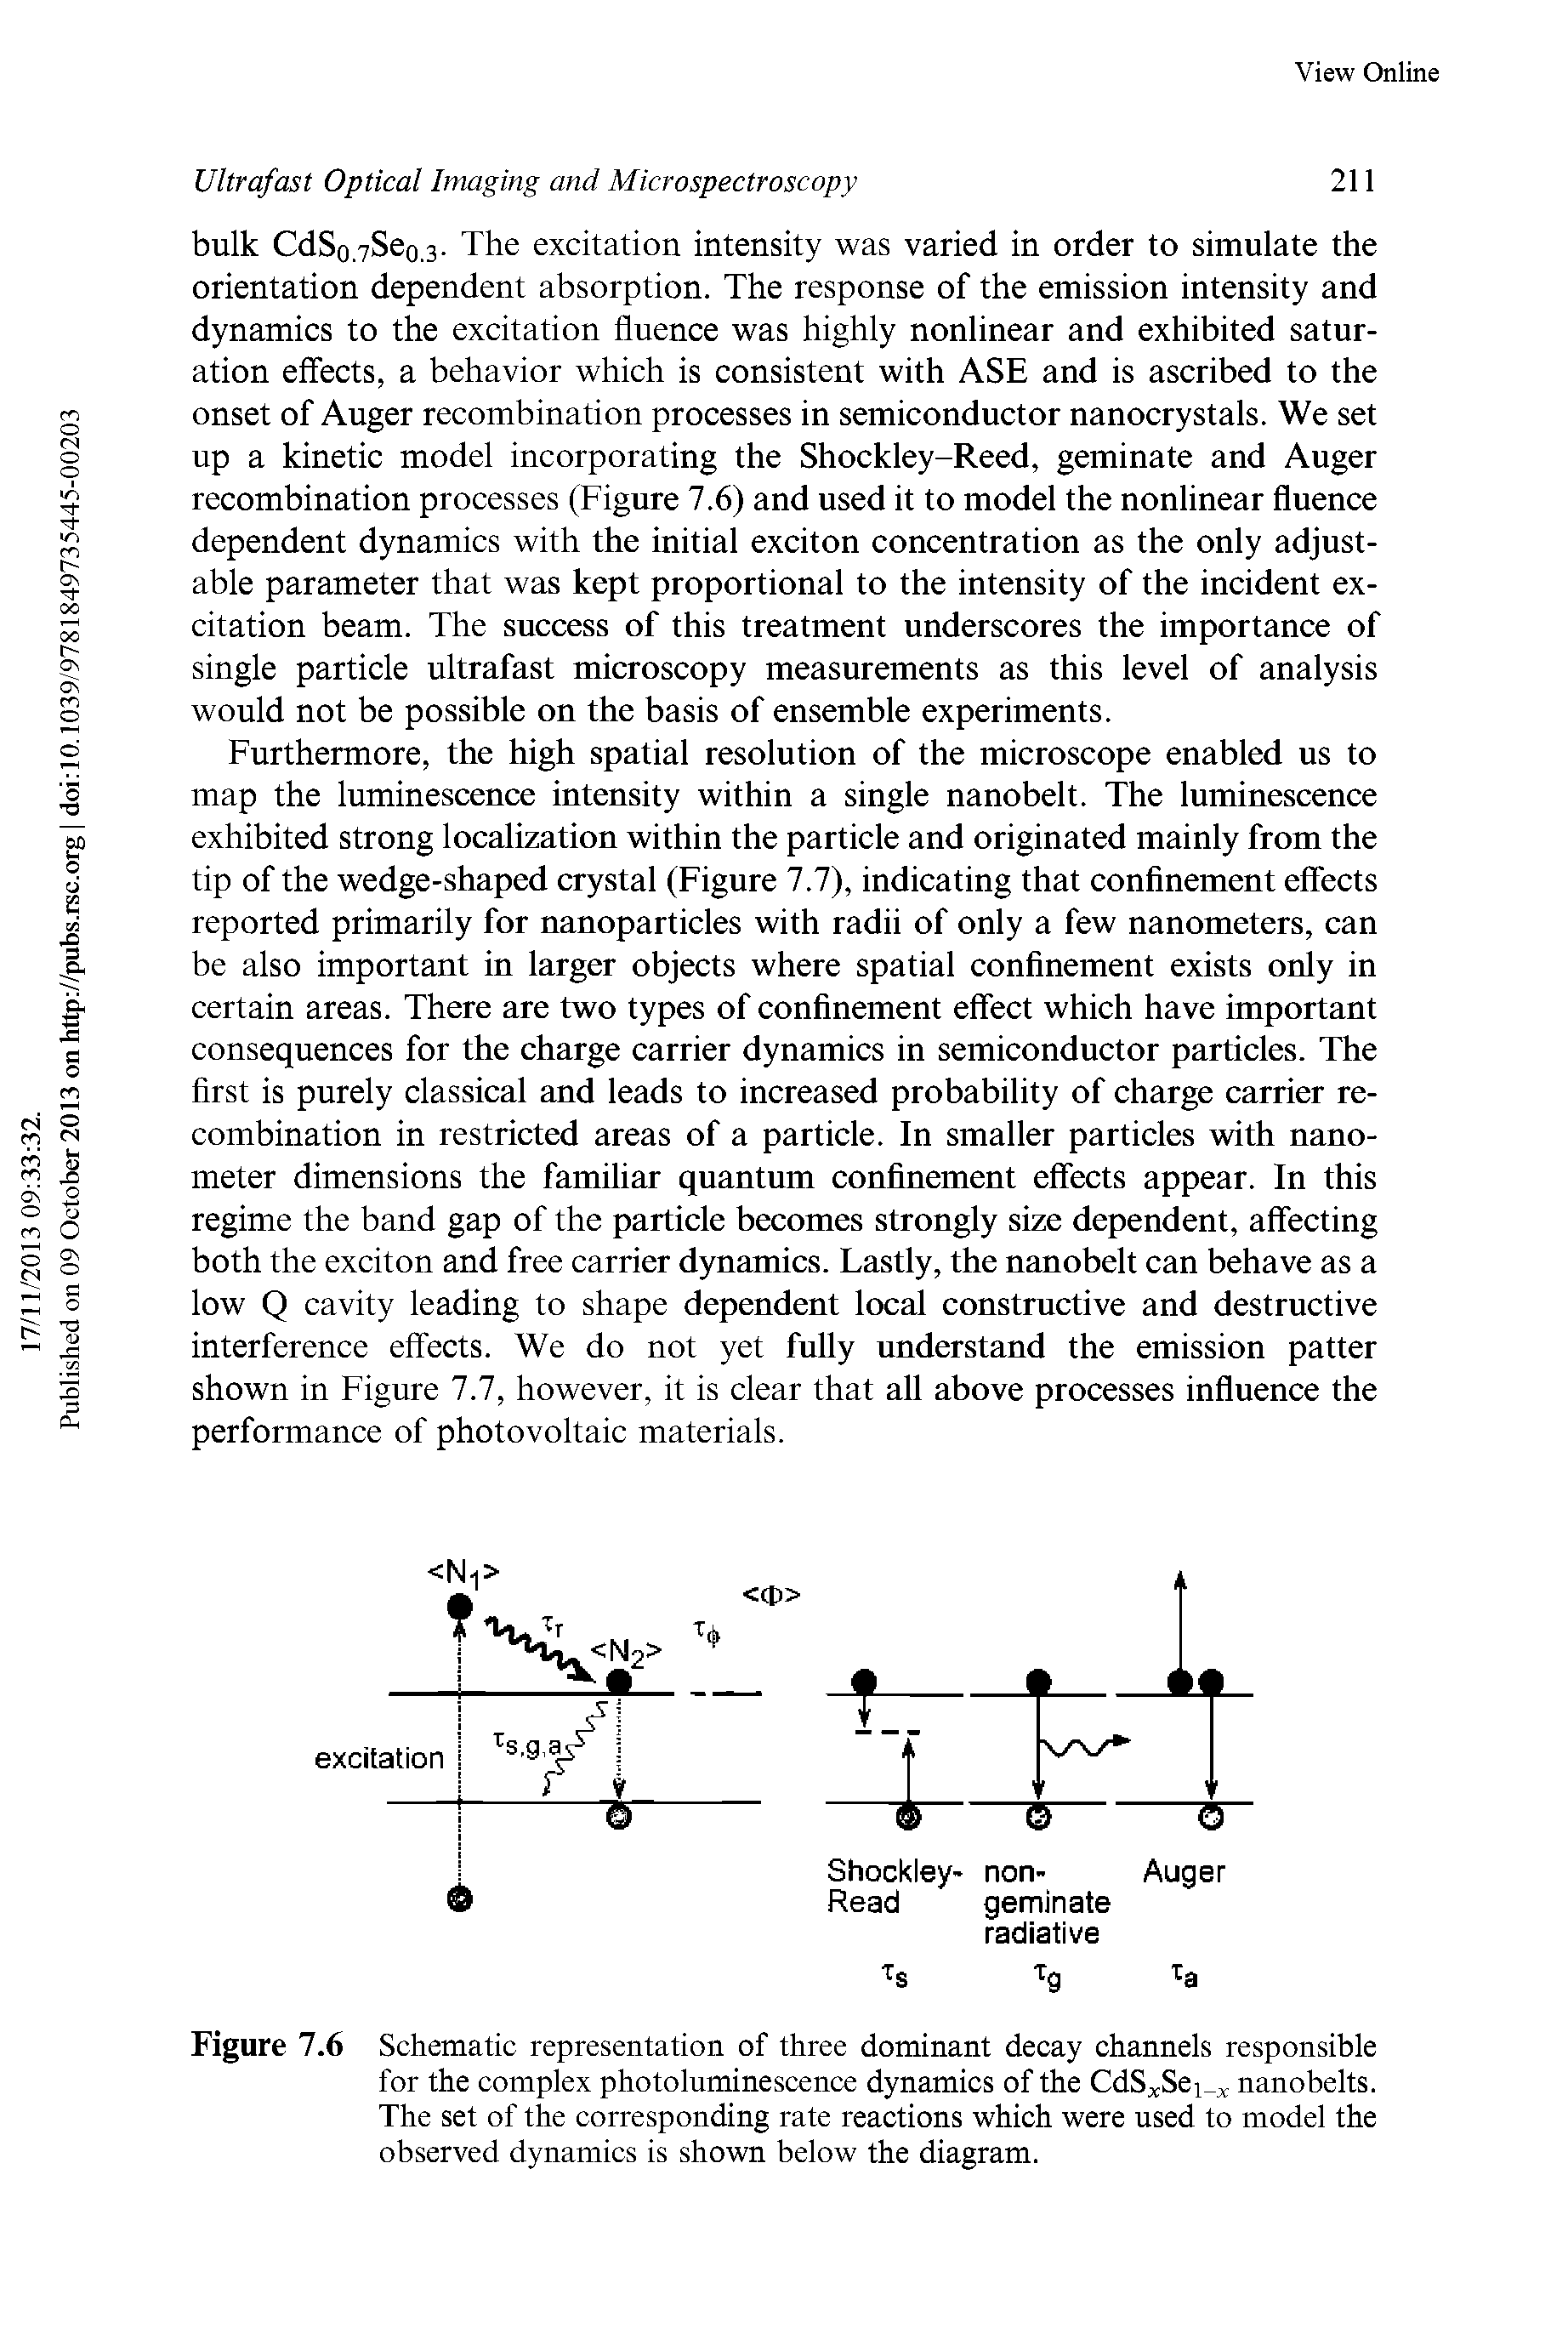 Figure 7.6 Schematic representation of three dominant decay channels responsible for the complex photoluminescence dynamics of the CdSxSei, t nanobelts. The set of the corresponding rate reactions which were used to model the observed dynamics is shown below the diagram.